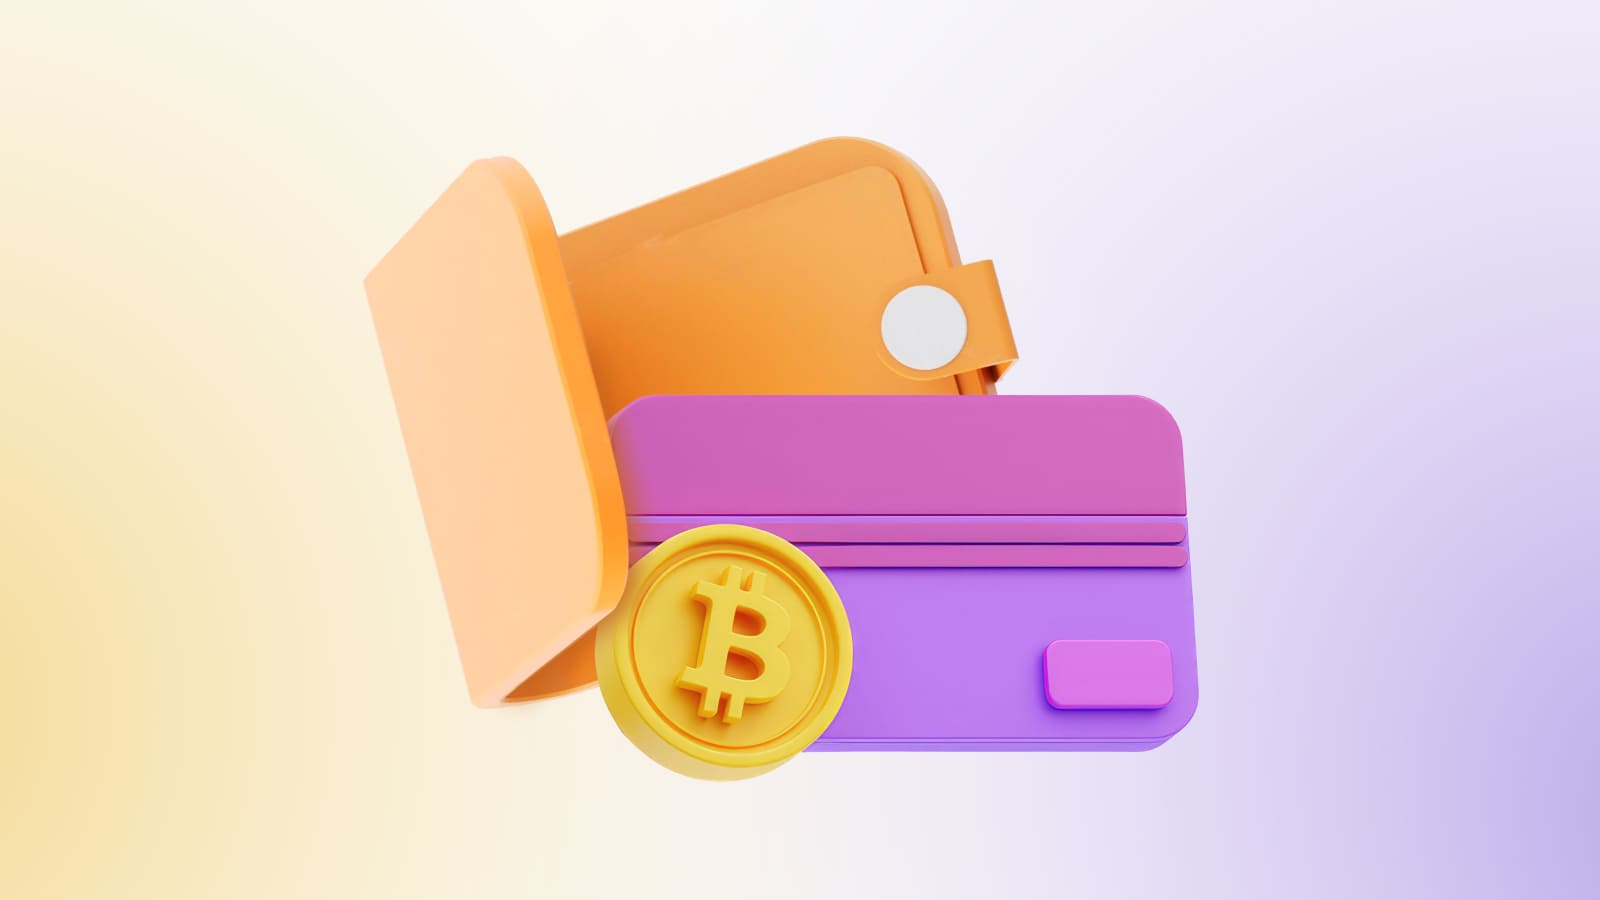 Visa and Mastercard cryptocurrency cards: new payment options.